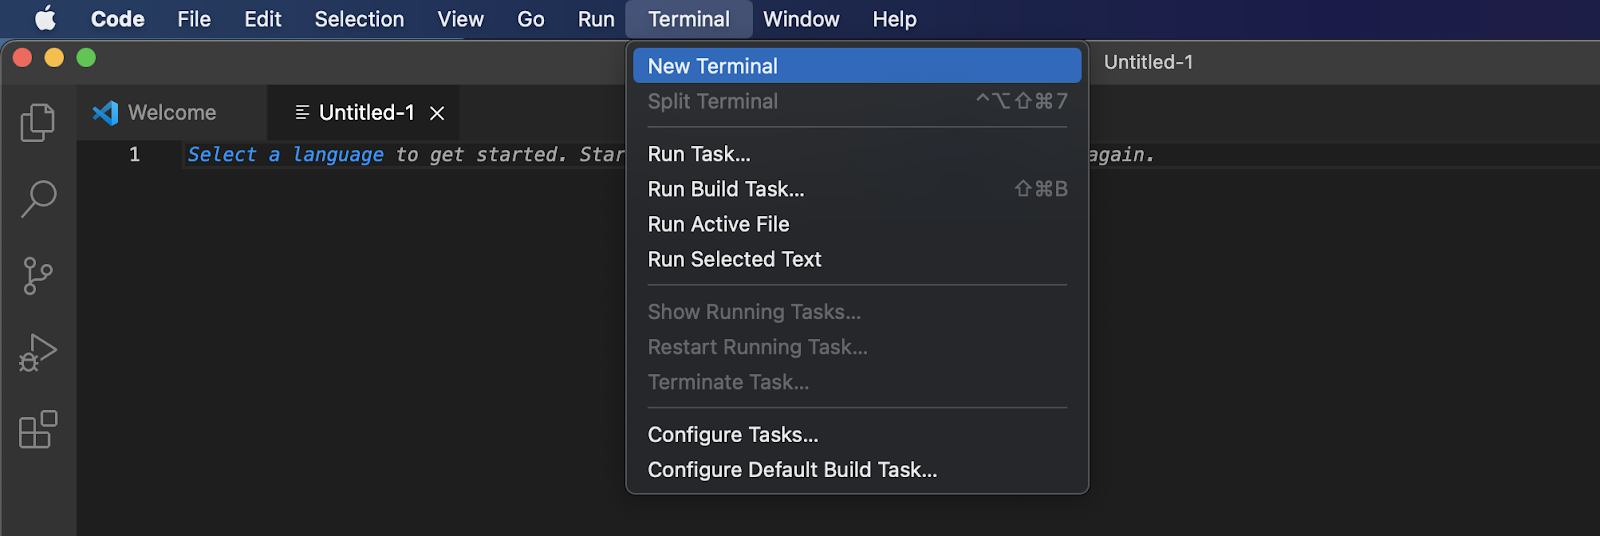 Visual Studio Code with a new terminal opened.